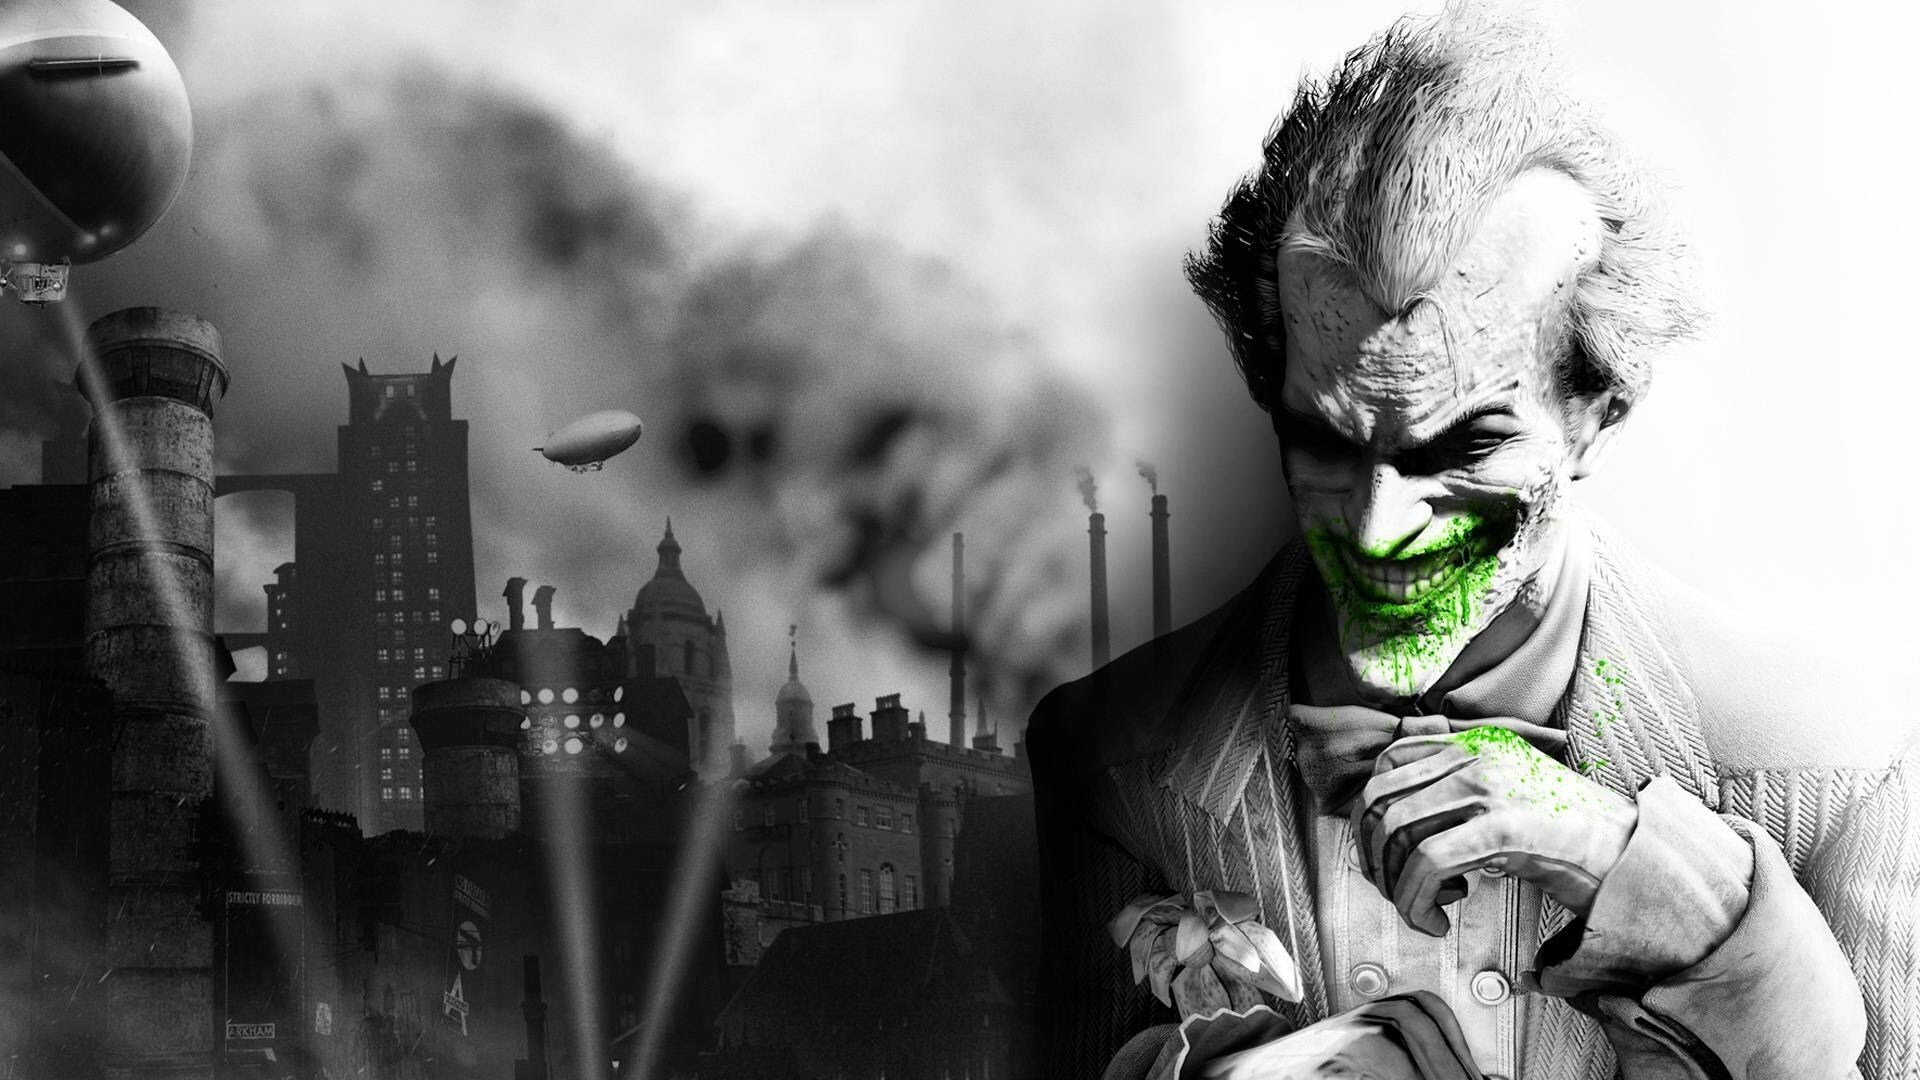 Batman: Arkham City: The Joker, Serves as one of the main antagonists of the game. 1920x1080 Full HD Background.